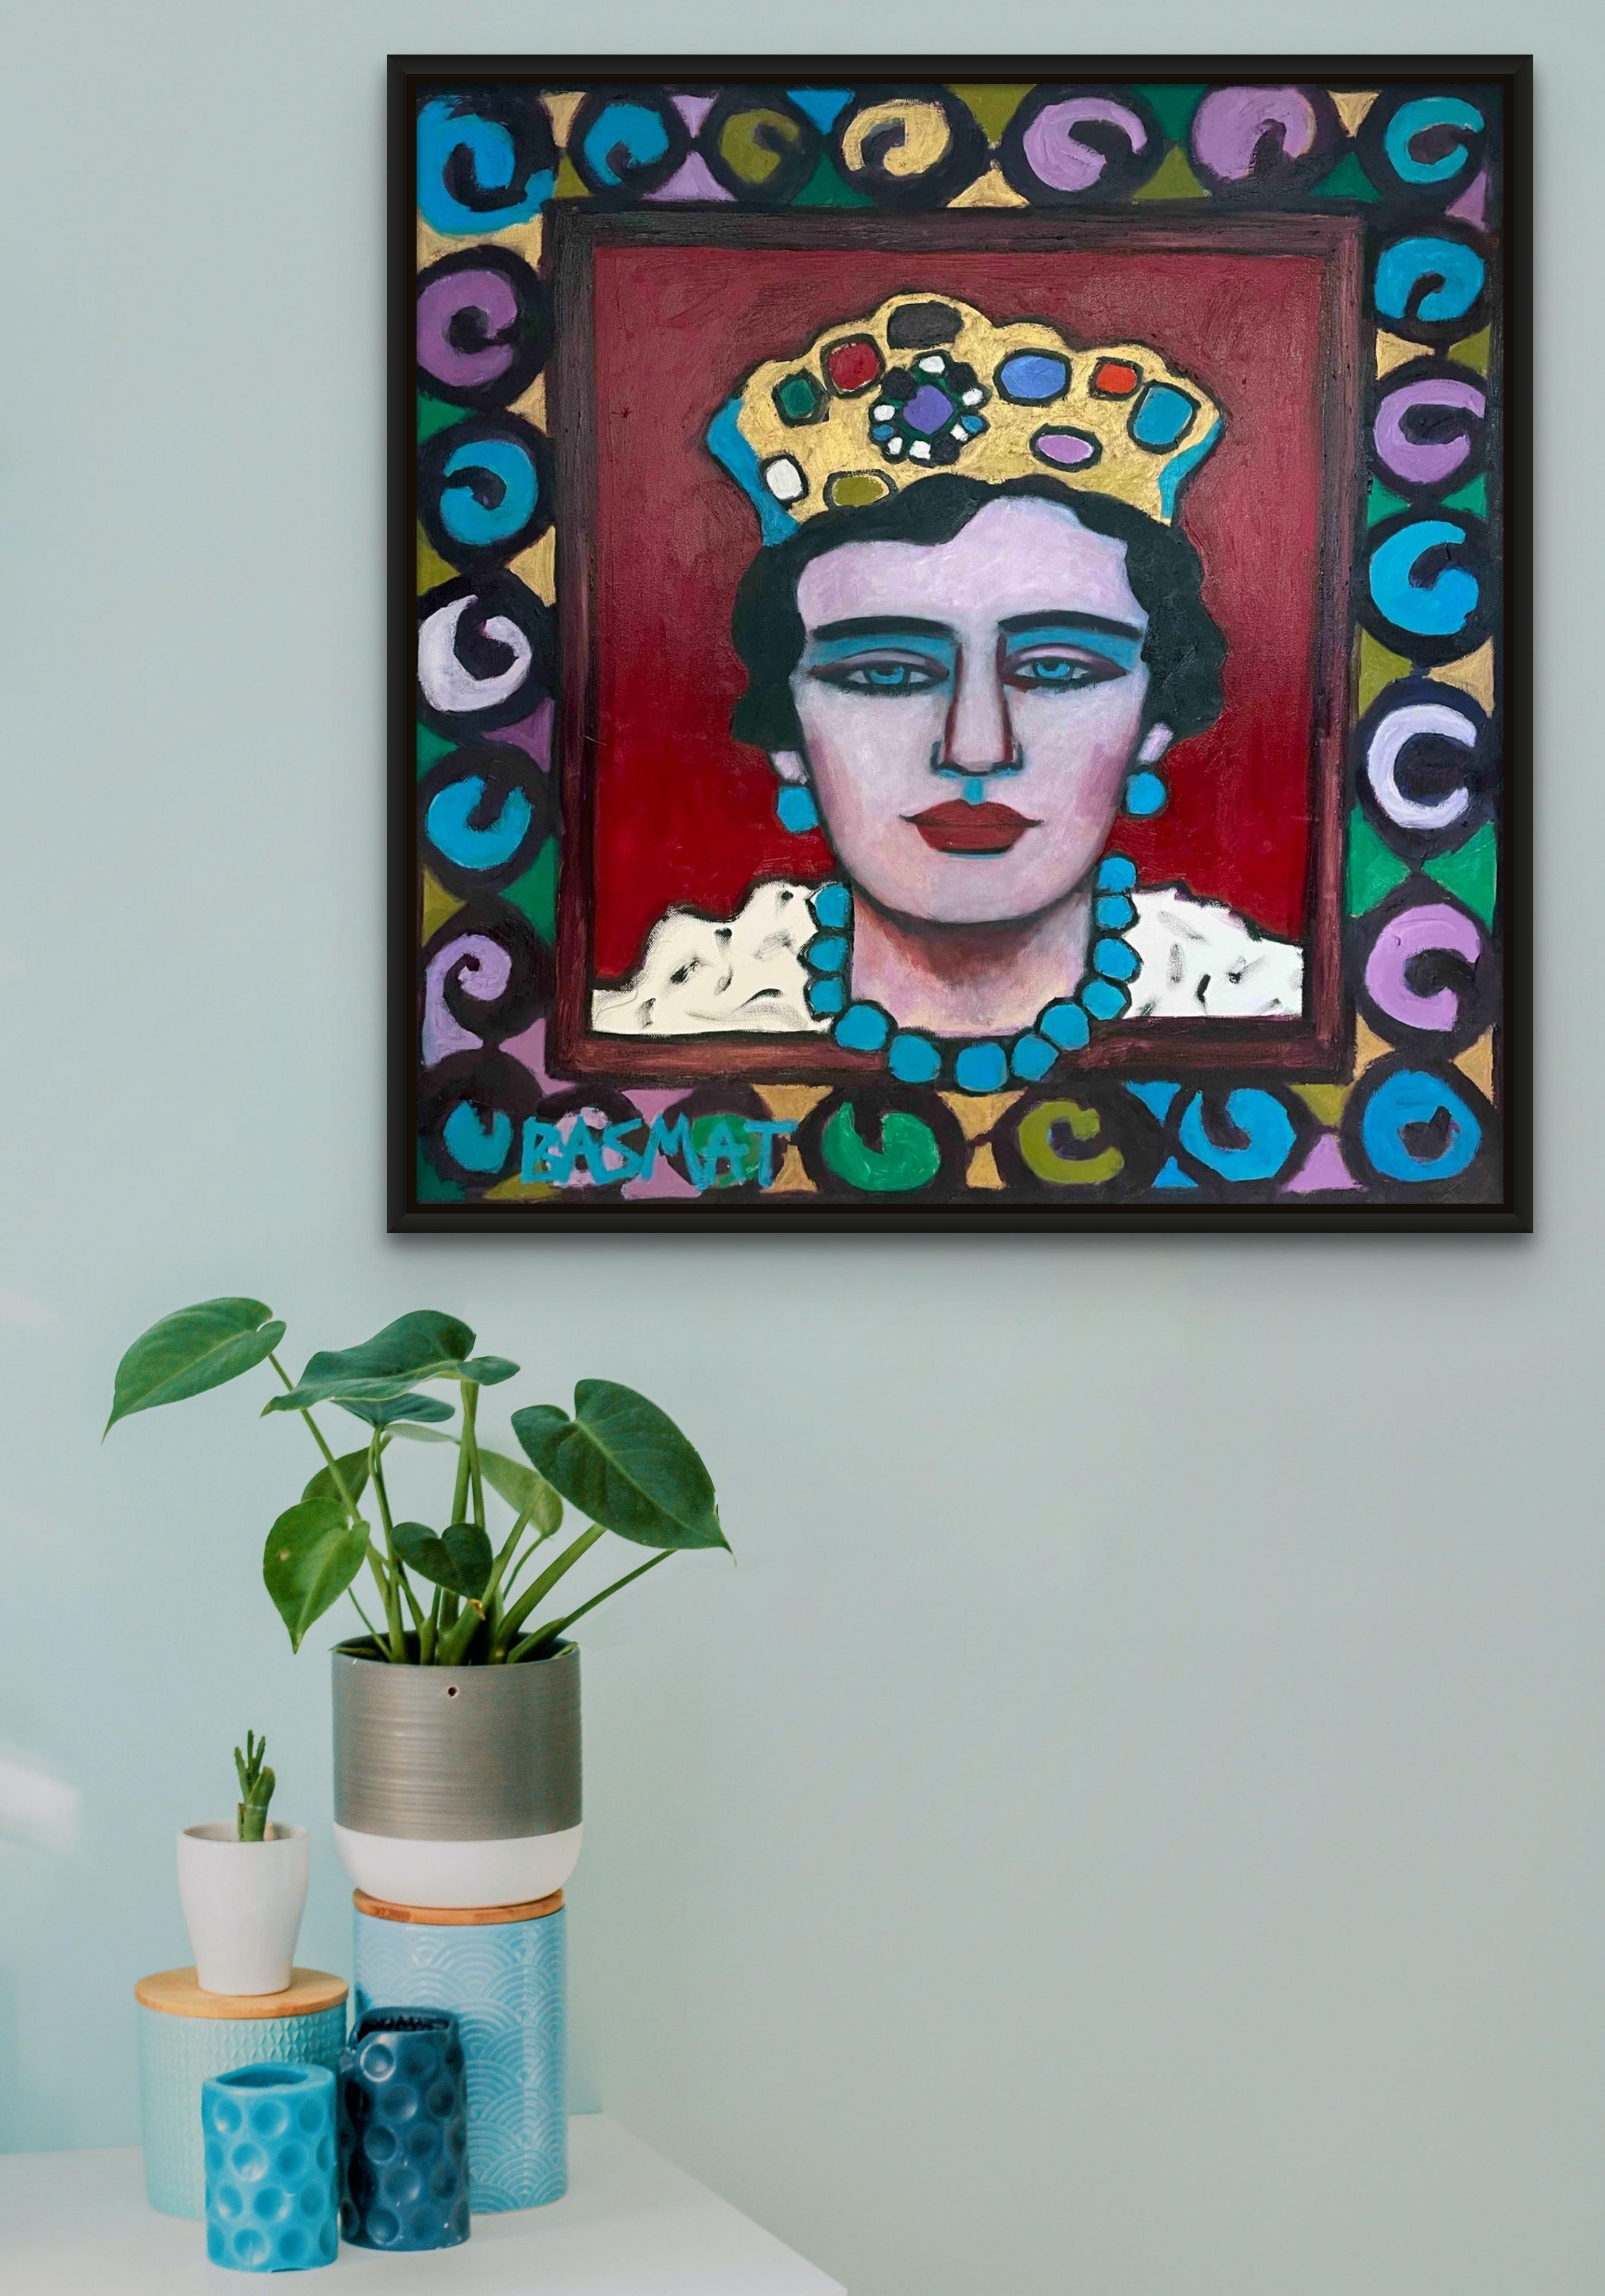 Queen Beacon, Square Portrait Print Edition on Canvas with Colourful Border - Black Abstract Print by Basmat Levin